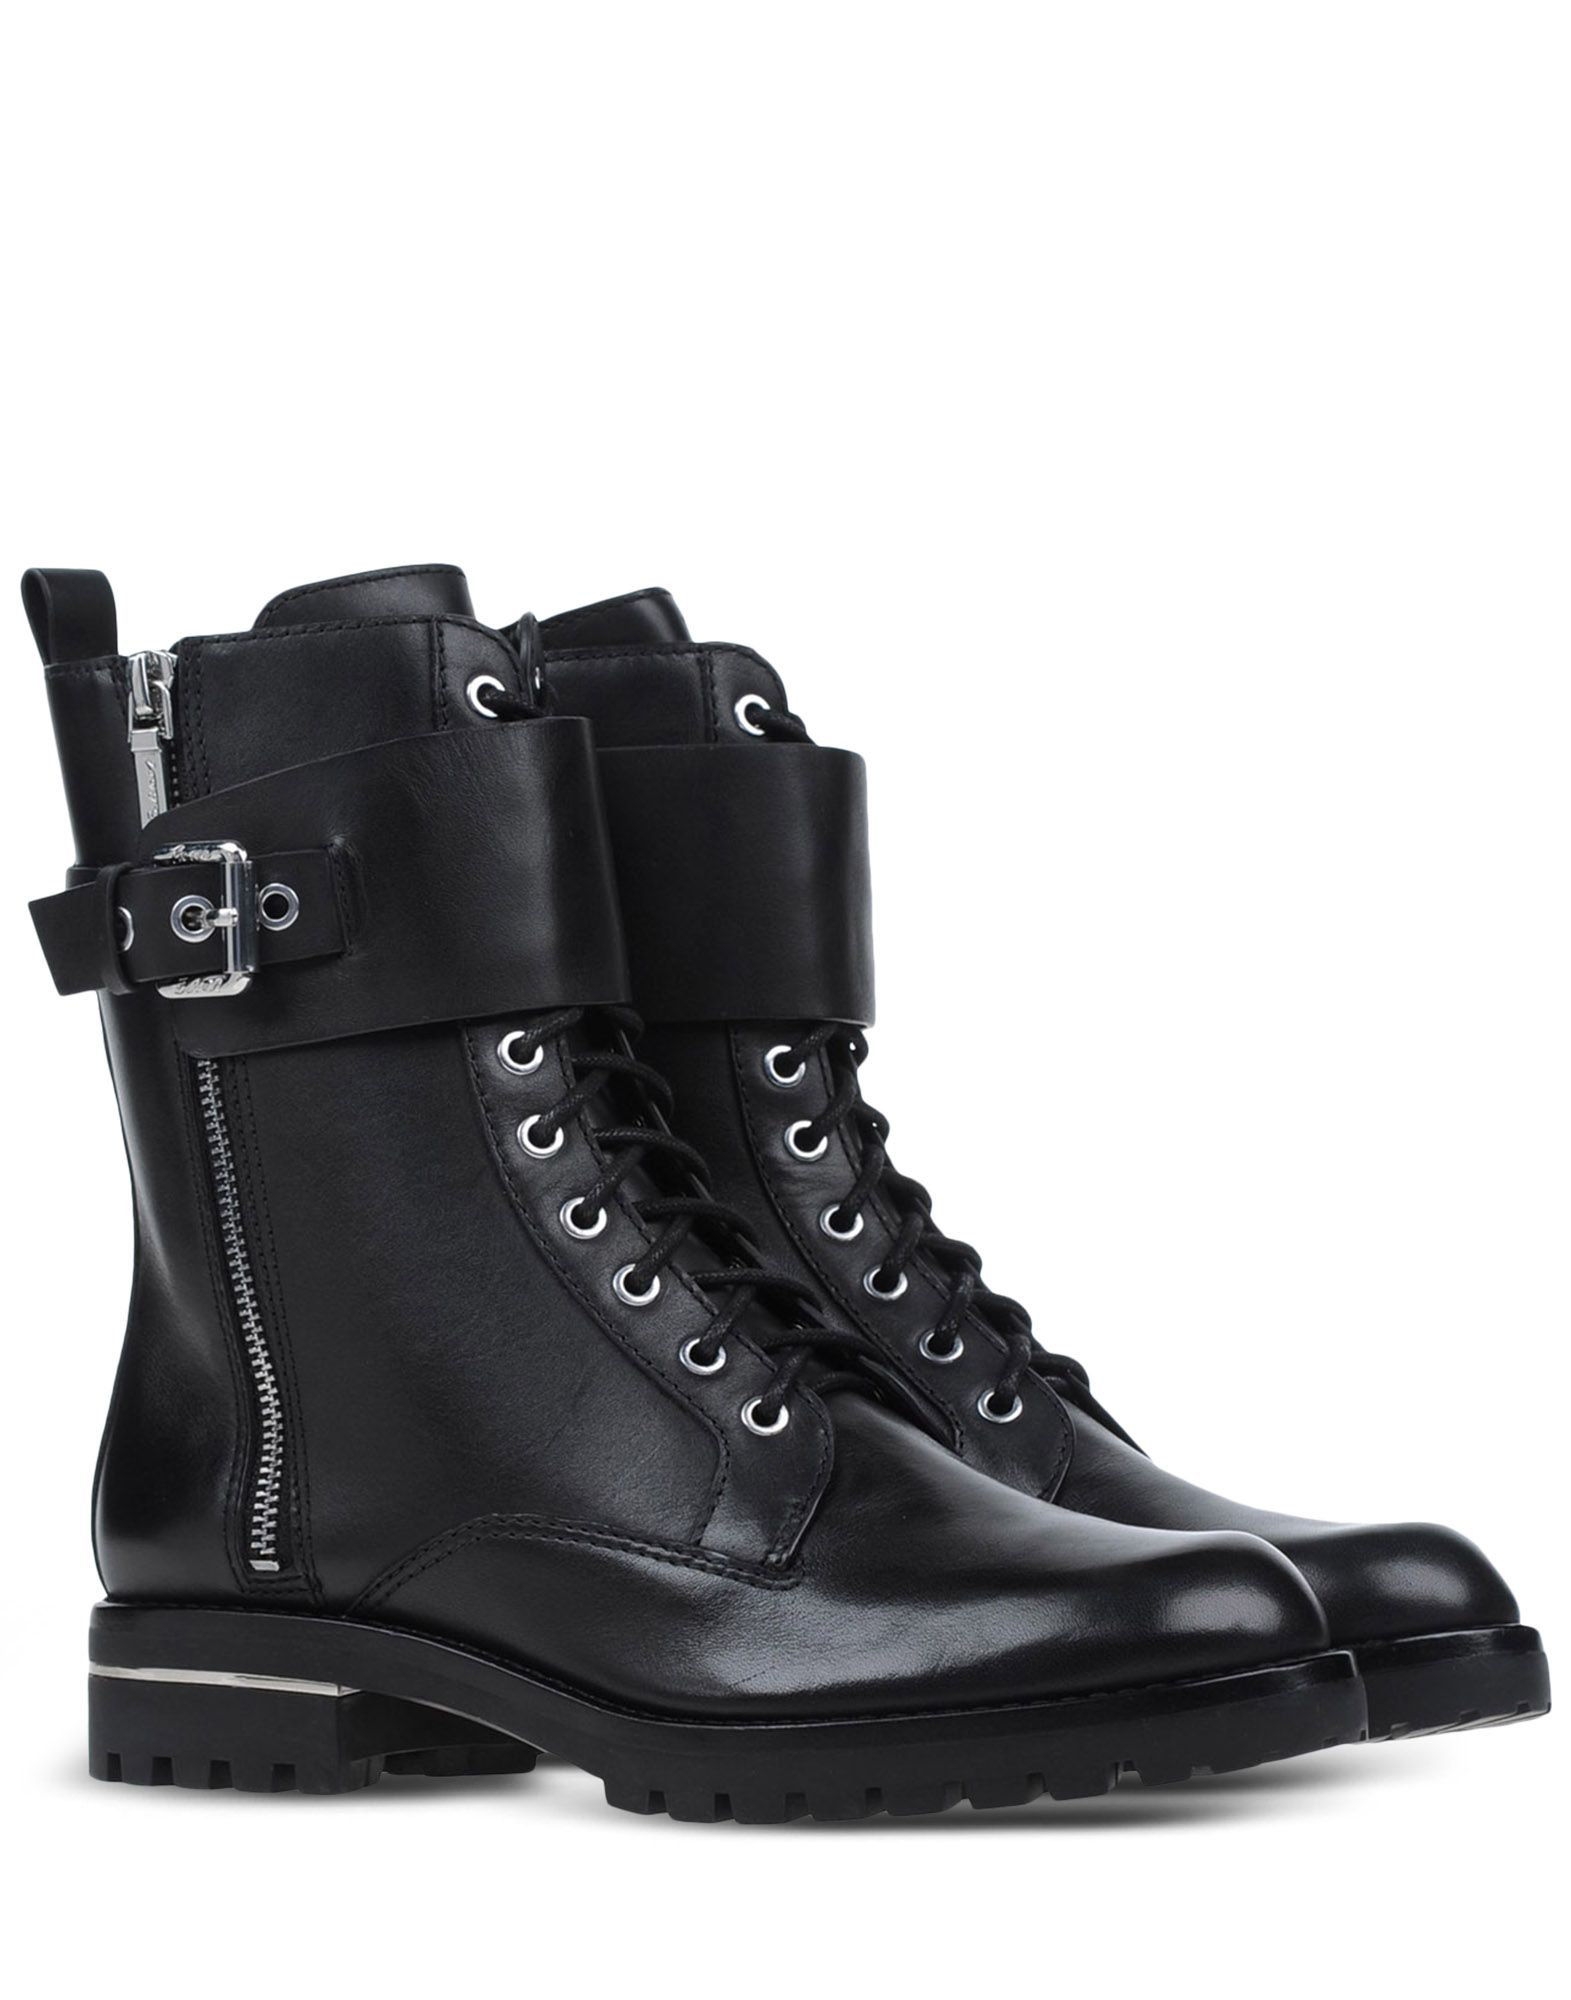 Balmain Ankle Boots in Black | Lyst